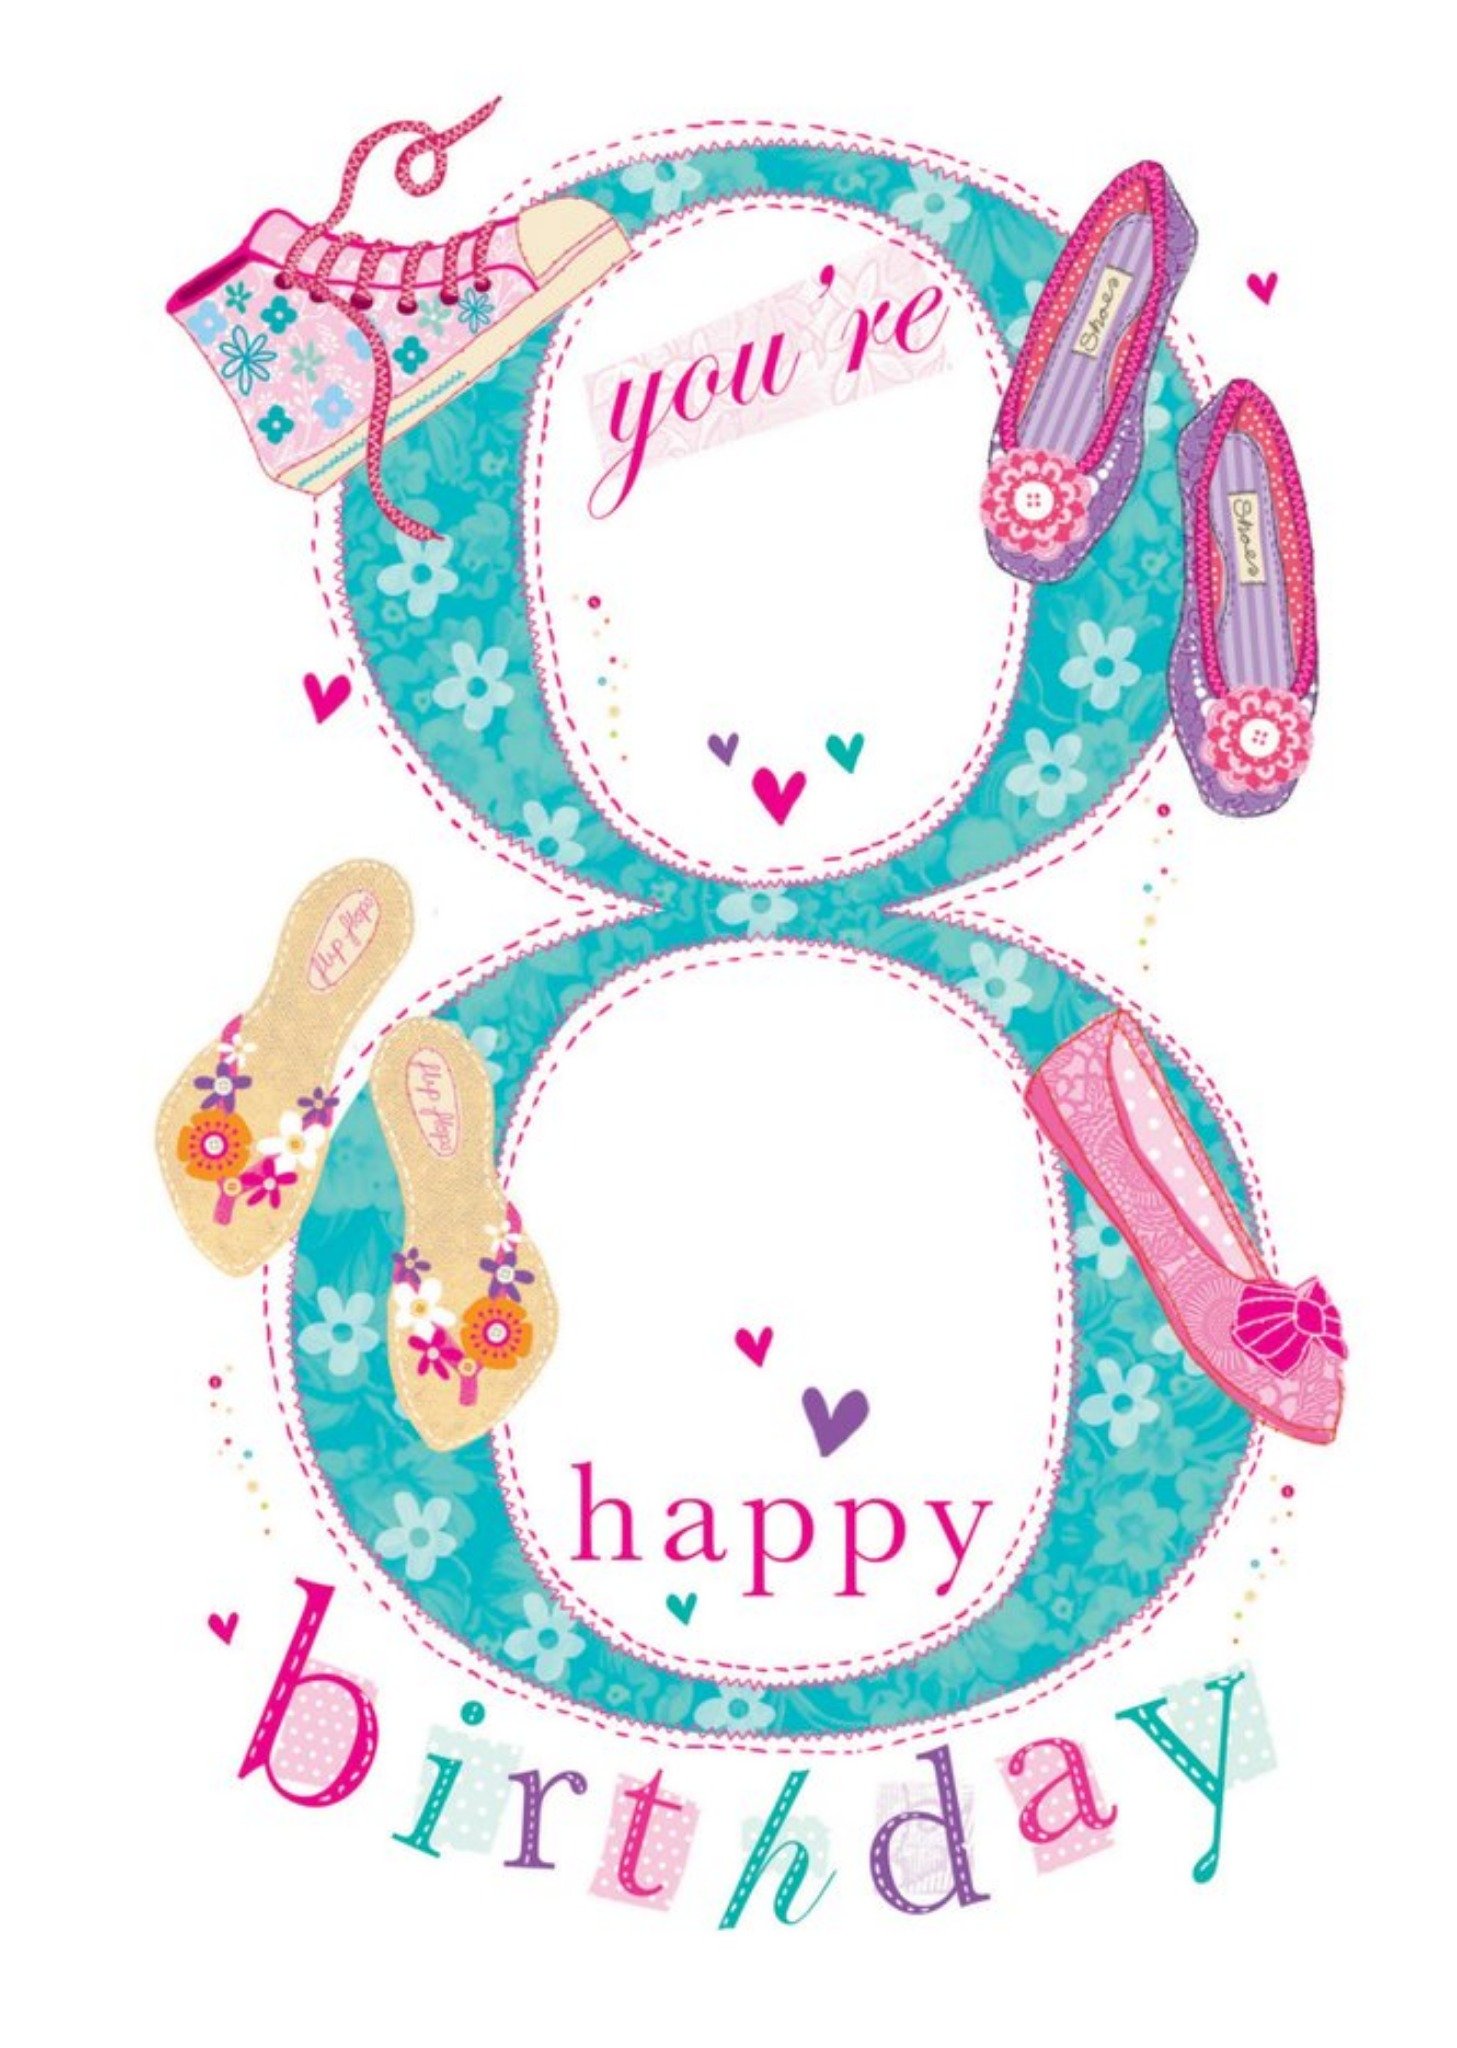 Moonpig Shoes You're 8 Today Happy Birthday Card, Large